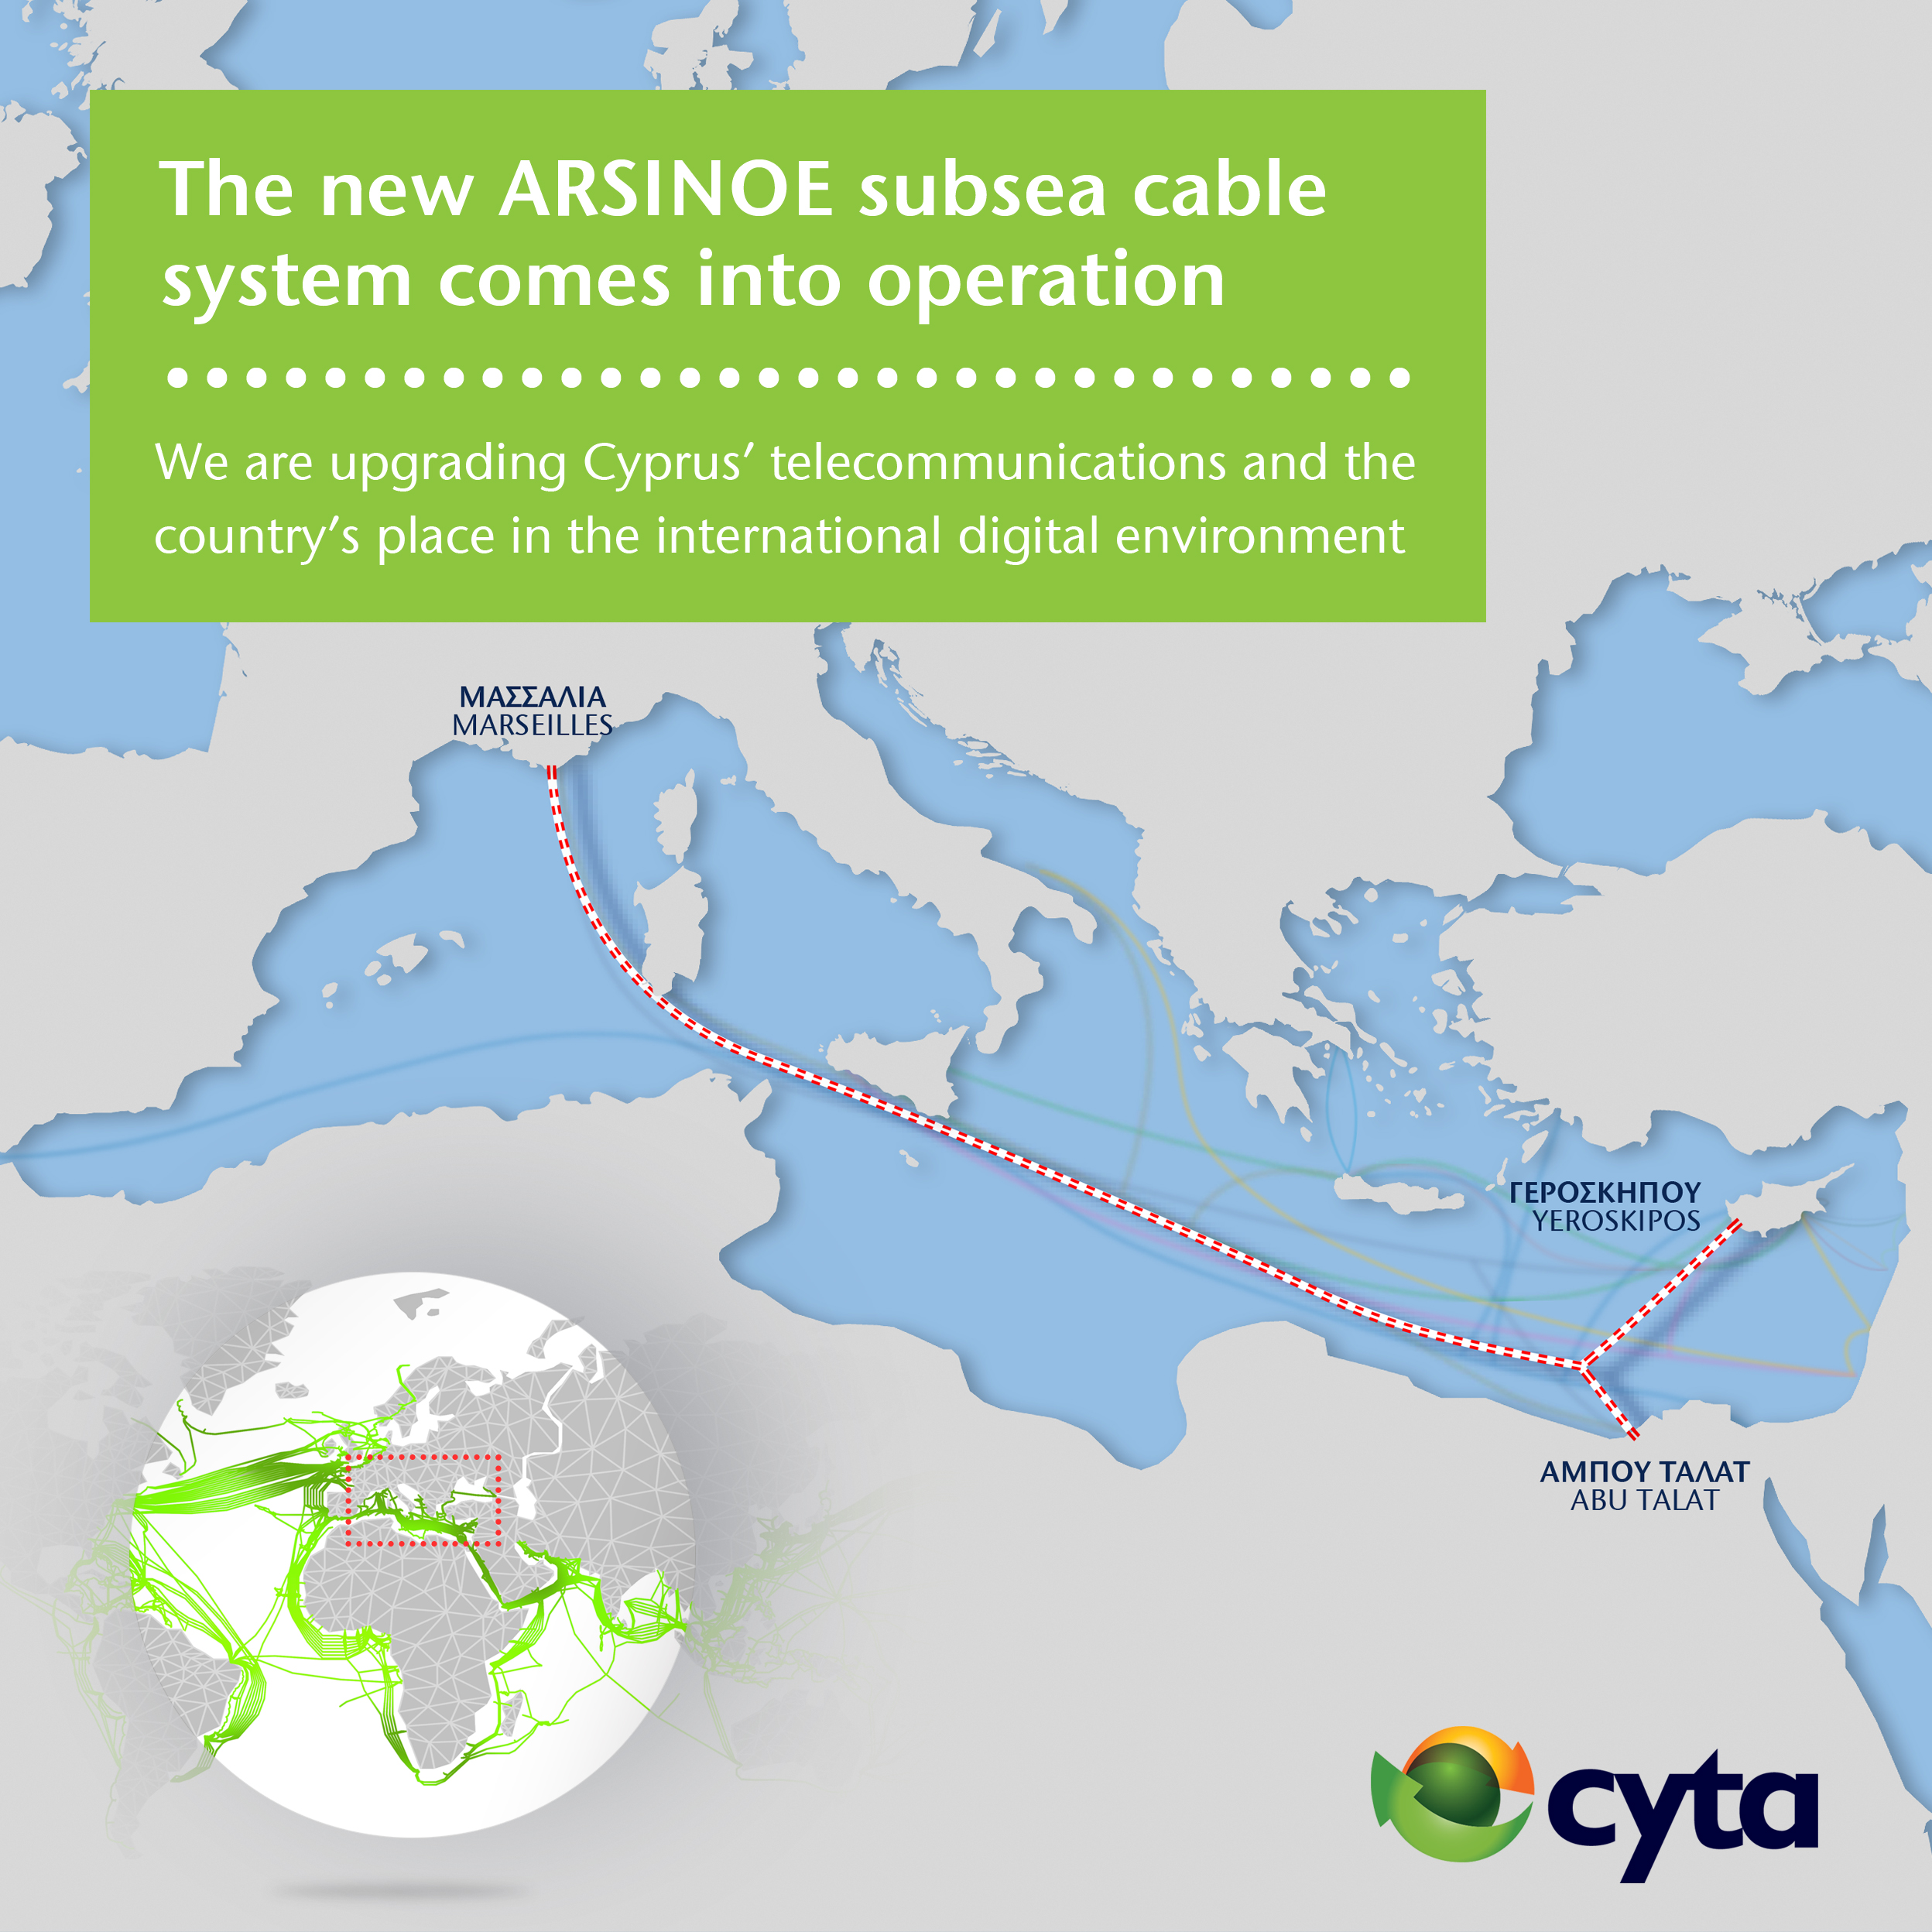 Cyta: The new ARSINOE subsea cable system comes into operation